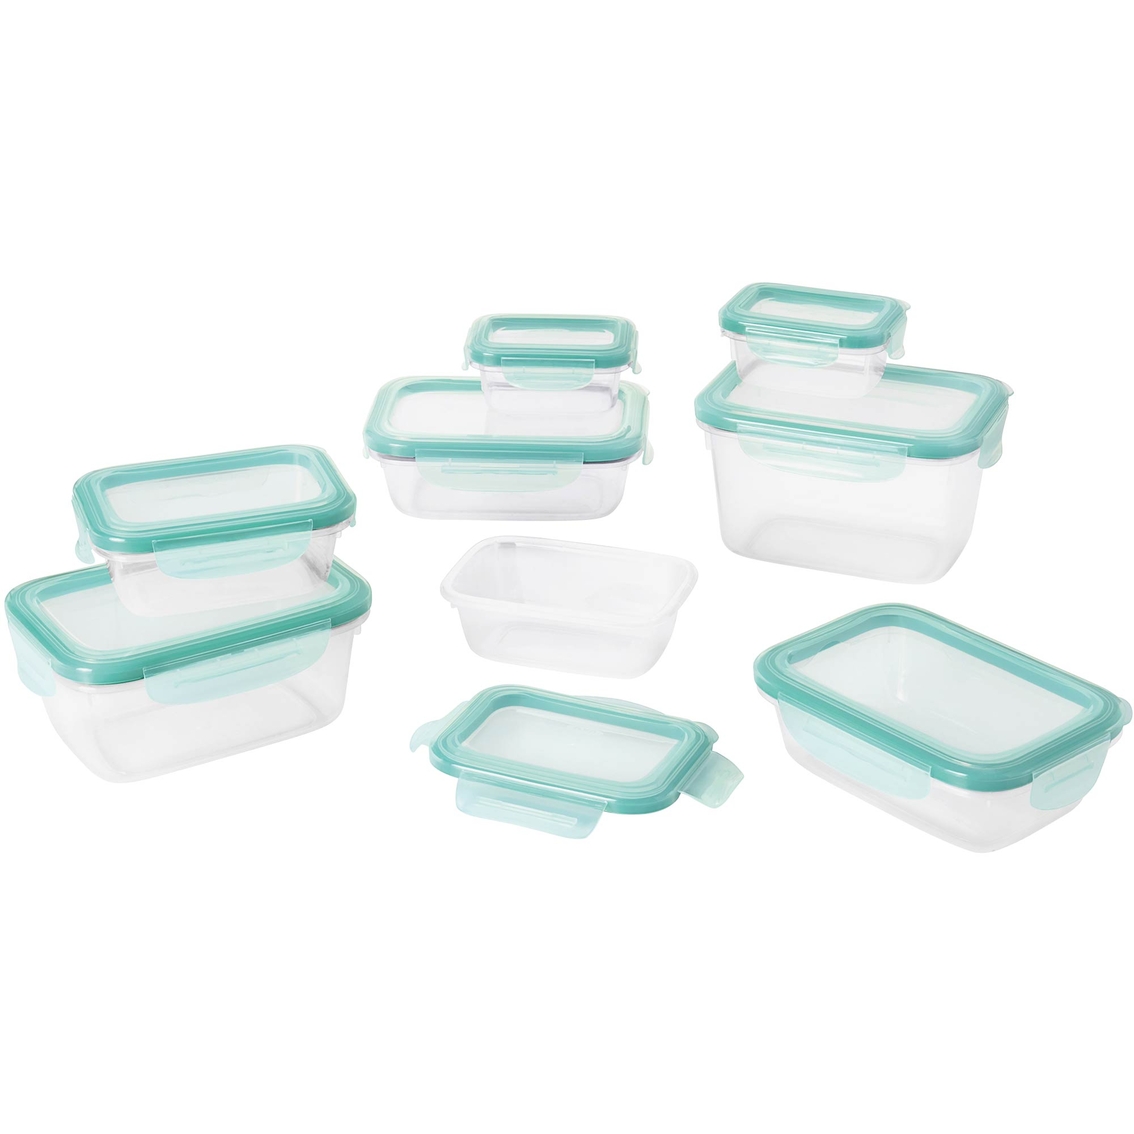 OXO Good Grips SNAP 16 pc. Plastic Food Storage Container Set